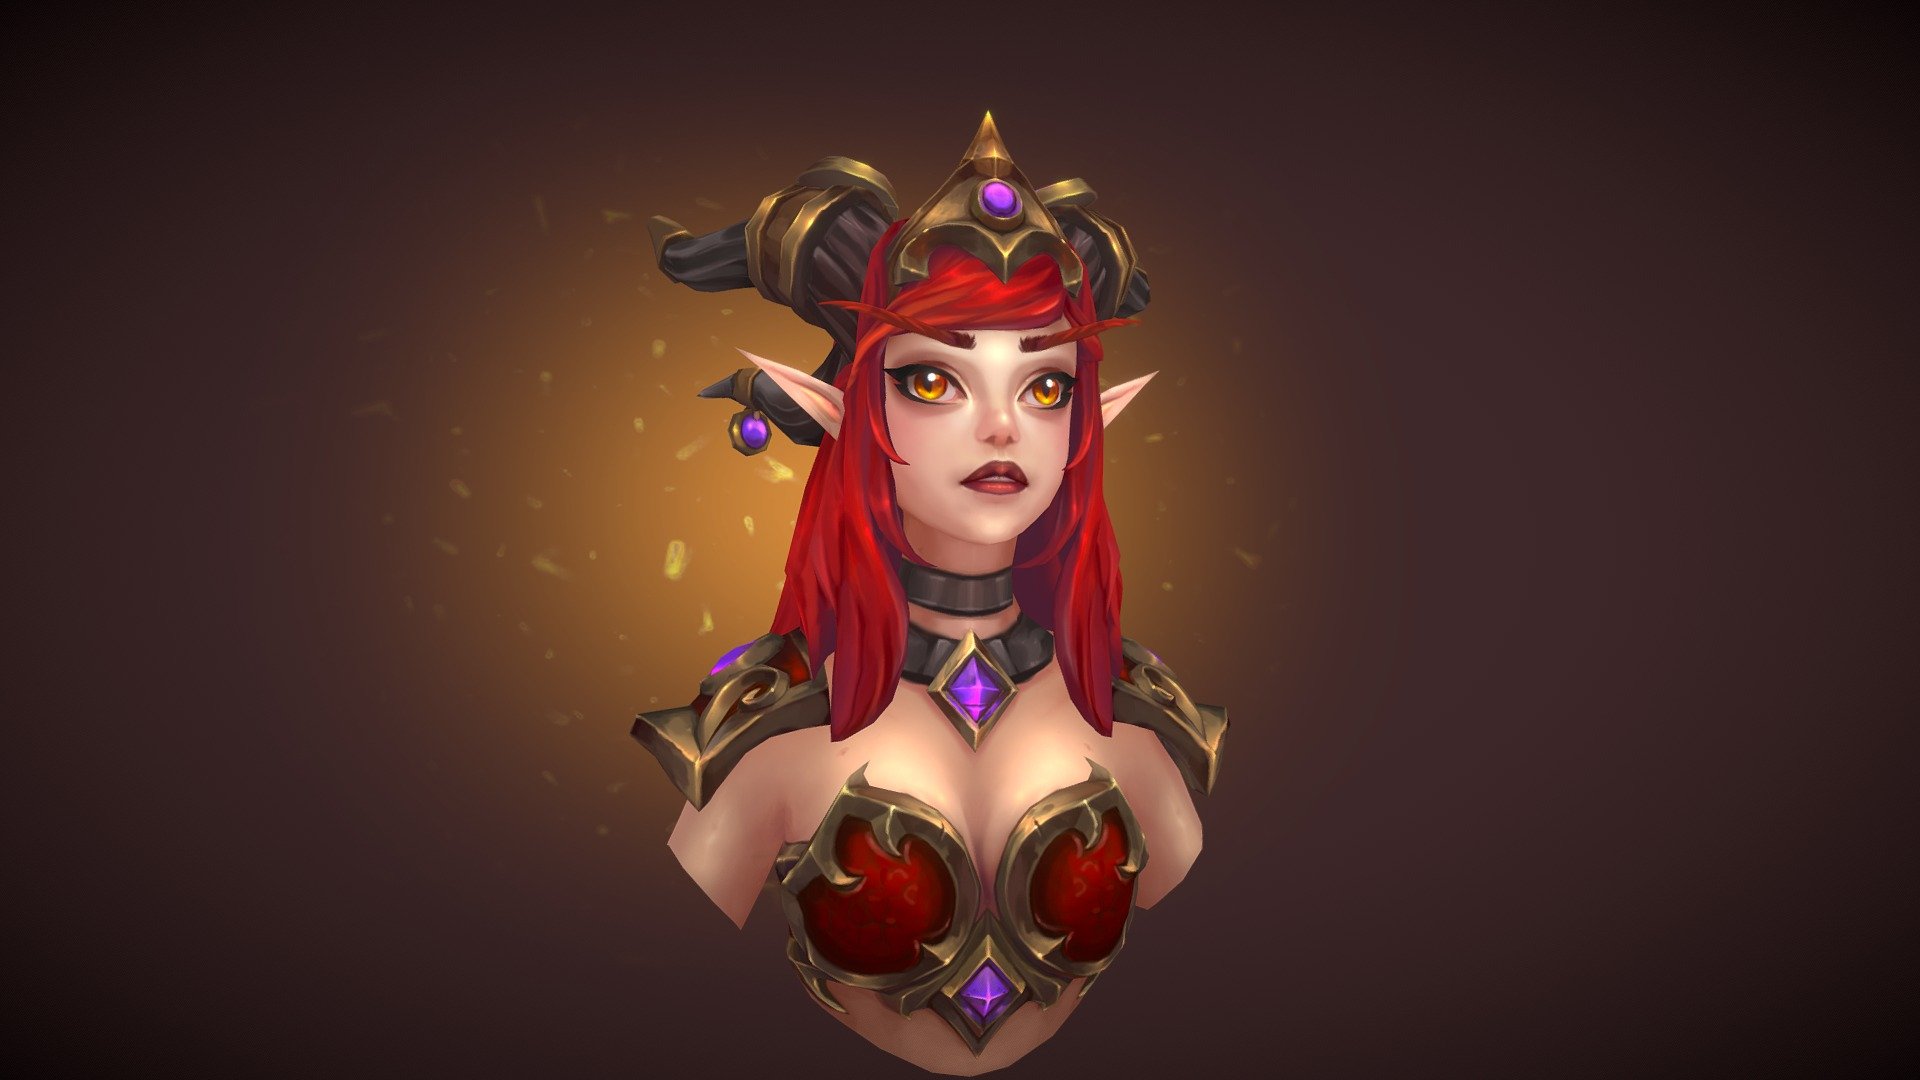 My entry to the #StylizedBustChallenge . This is hybrid Alexstrasza's outfit that I like from games and cosplays. Full project here - https://www.artstation.com/oleaf - Alexstrasza - 3D model by Oleaf (@homkahom0) 3d model